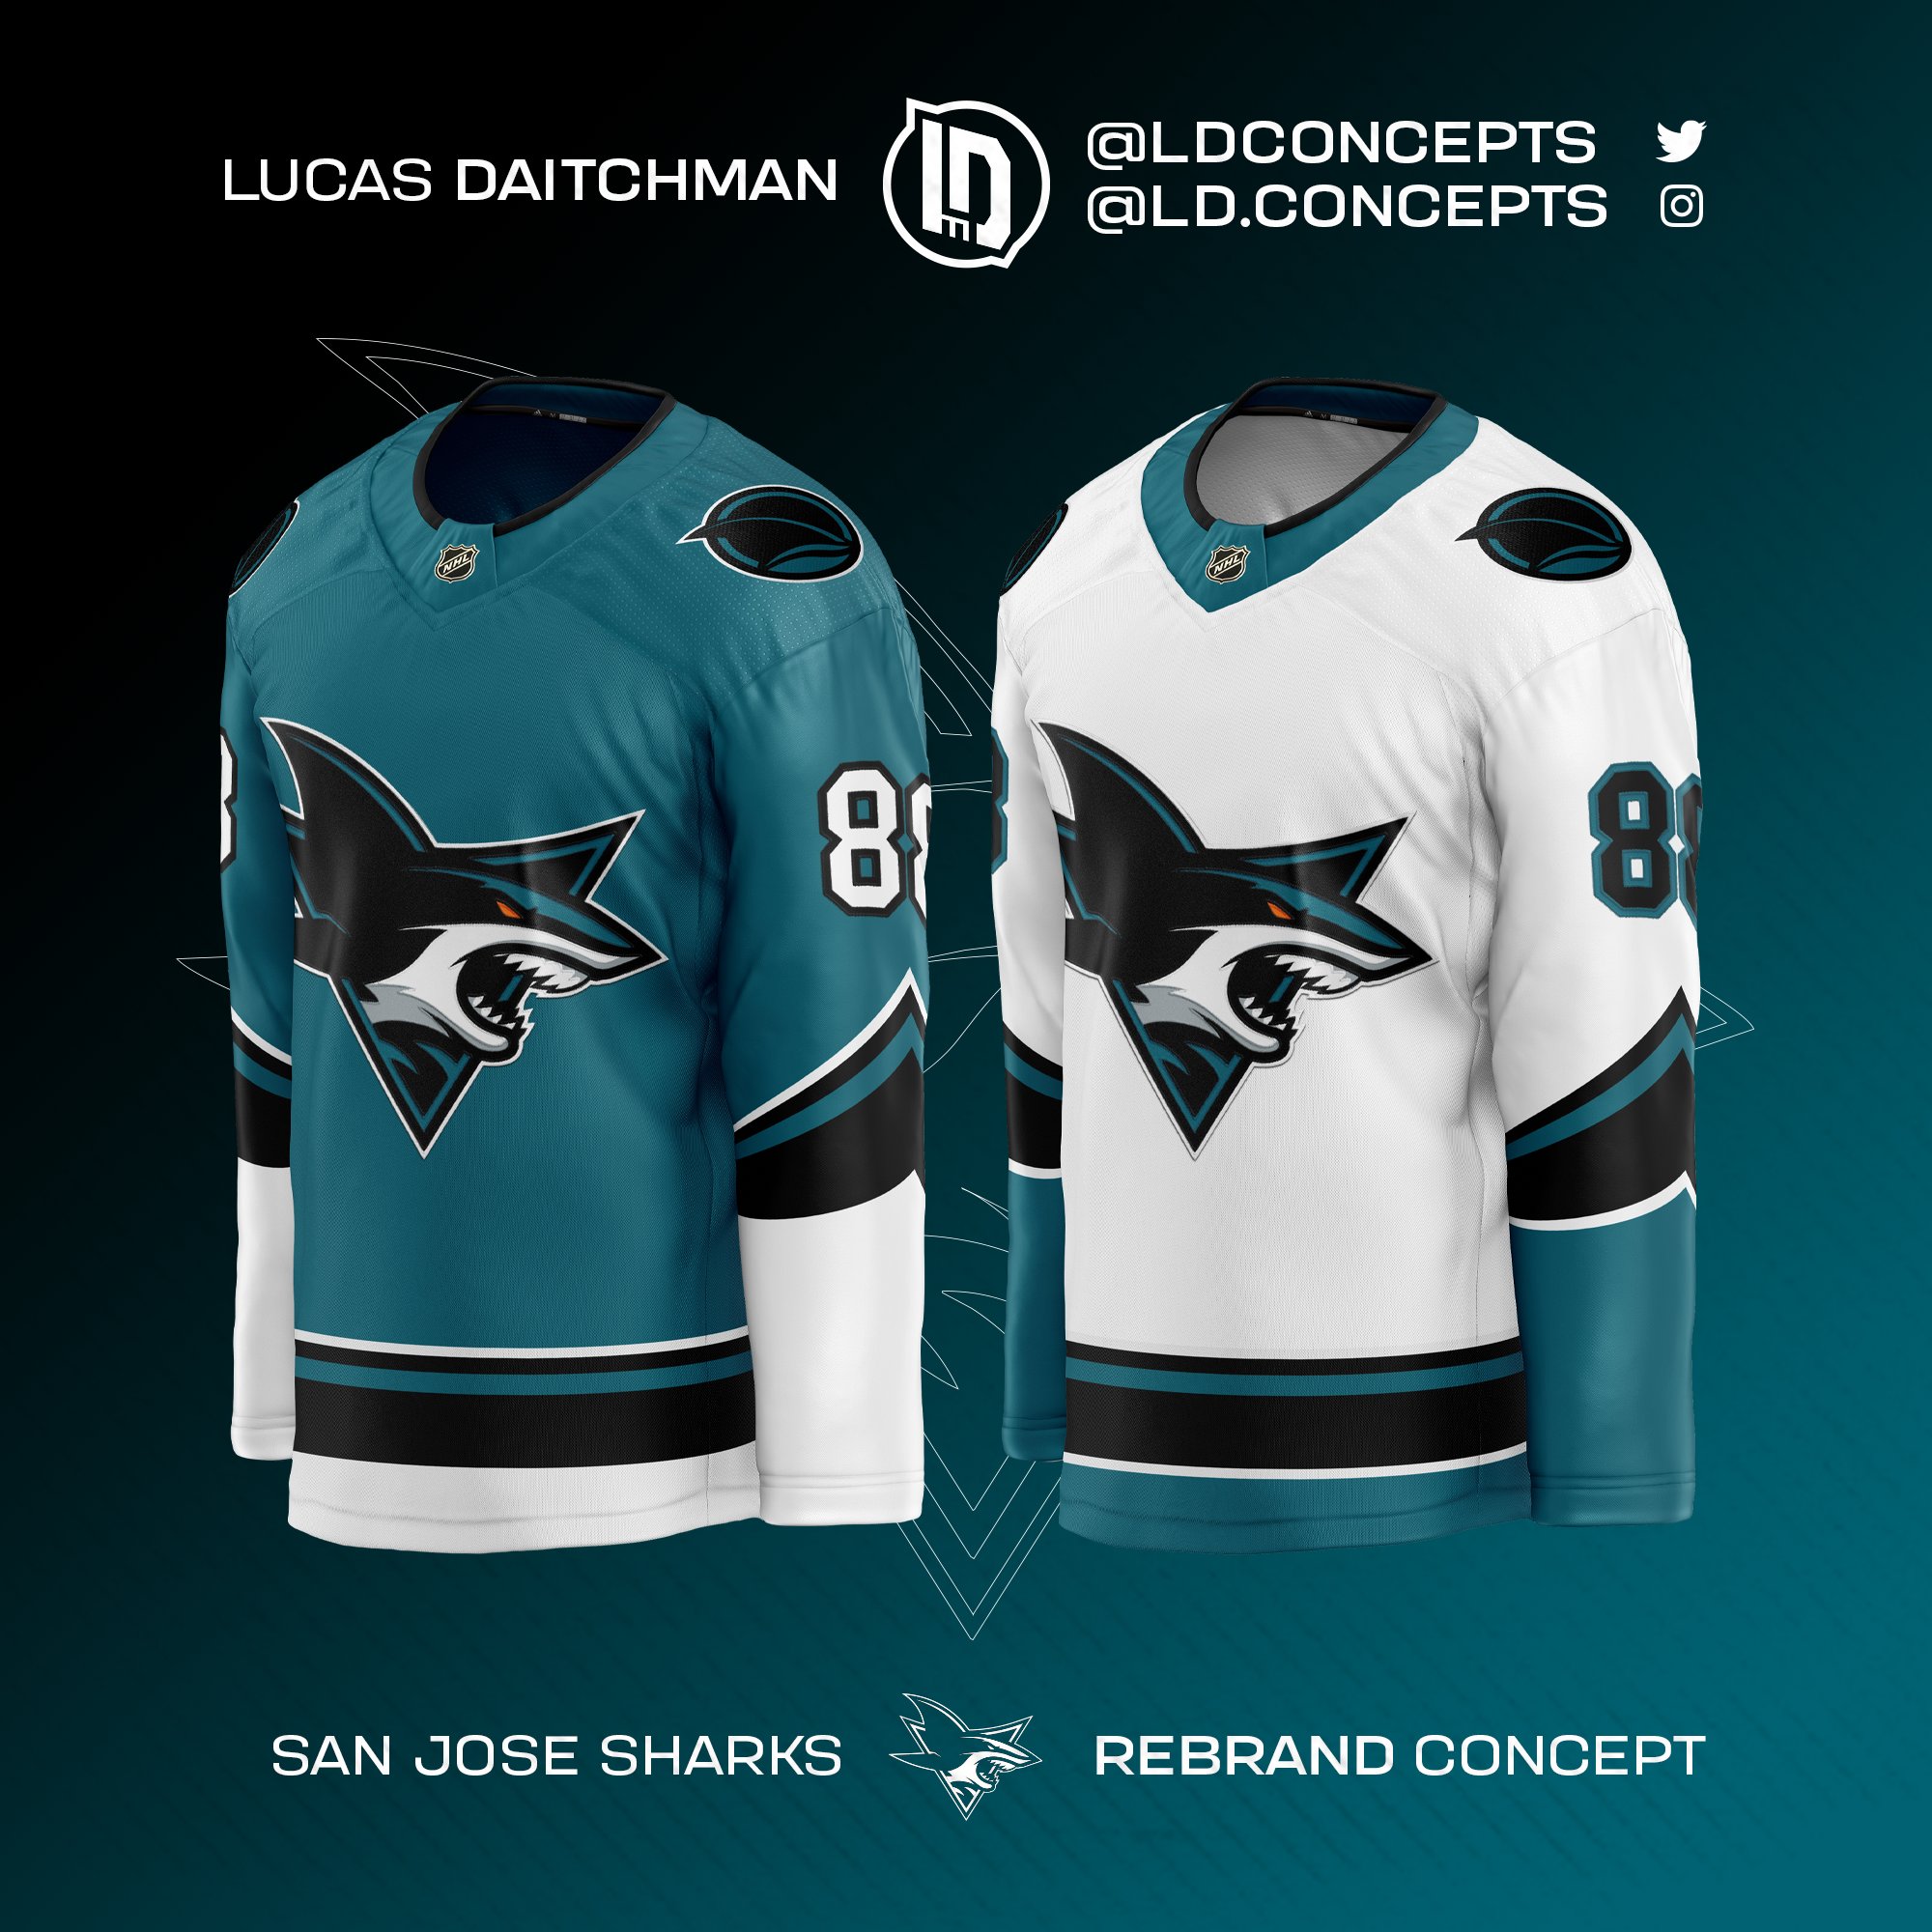 So the @lids #ultimatejerseycollector campaign has started and